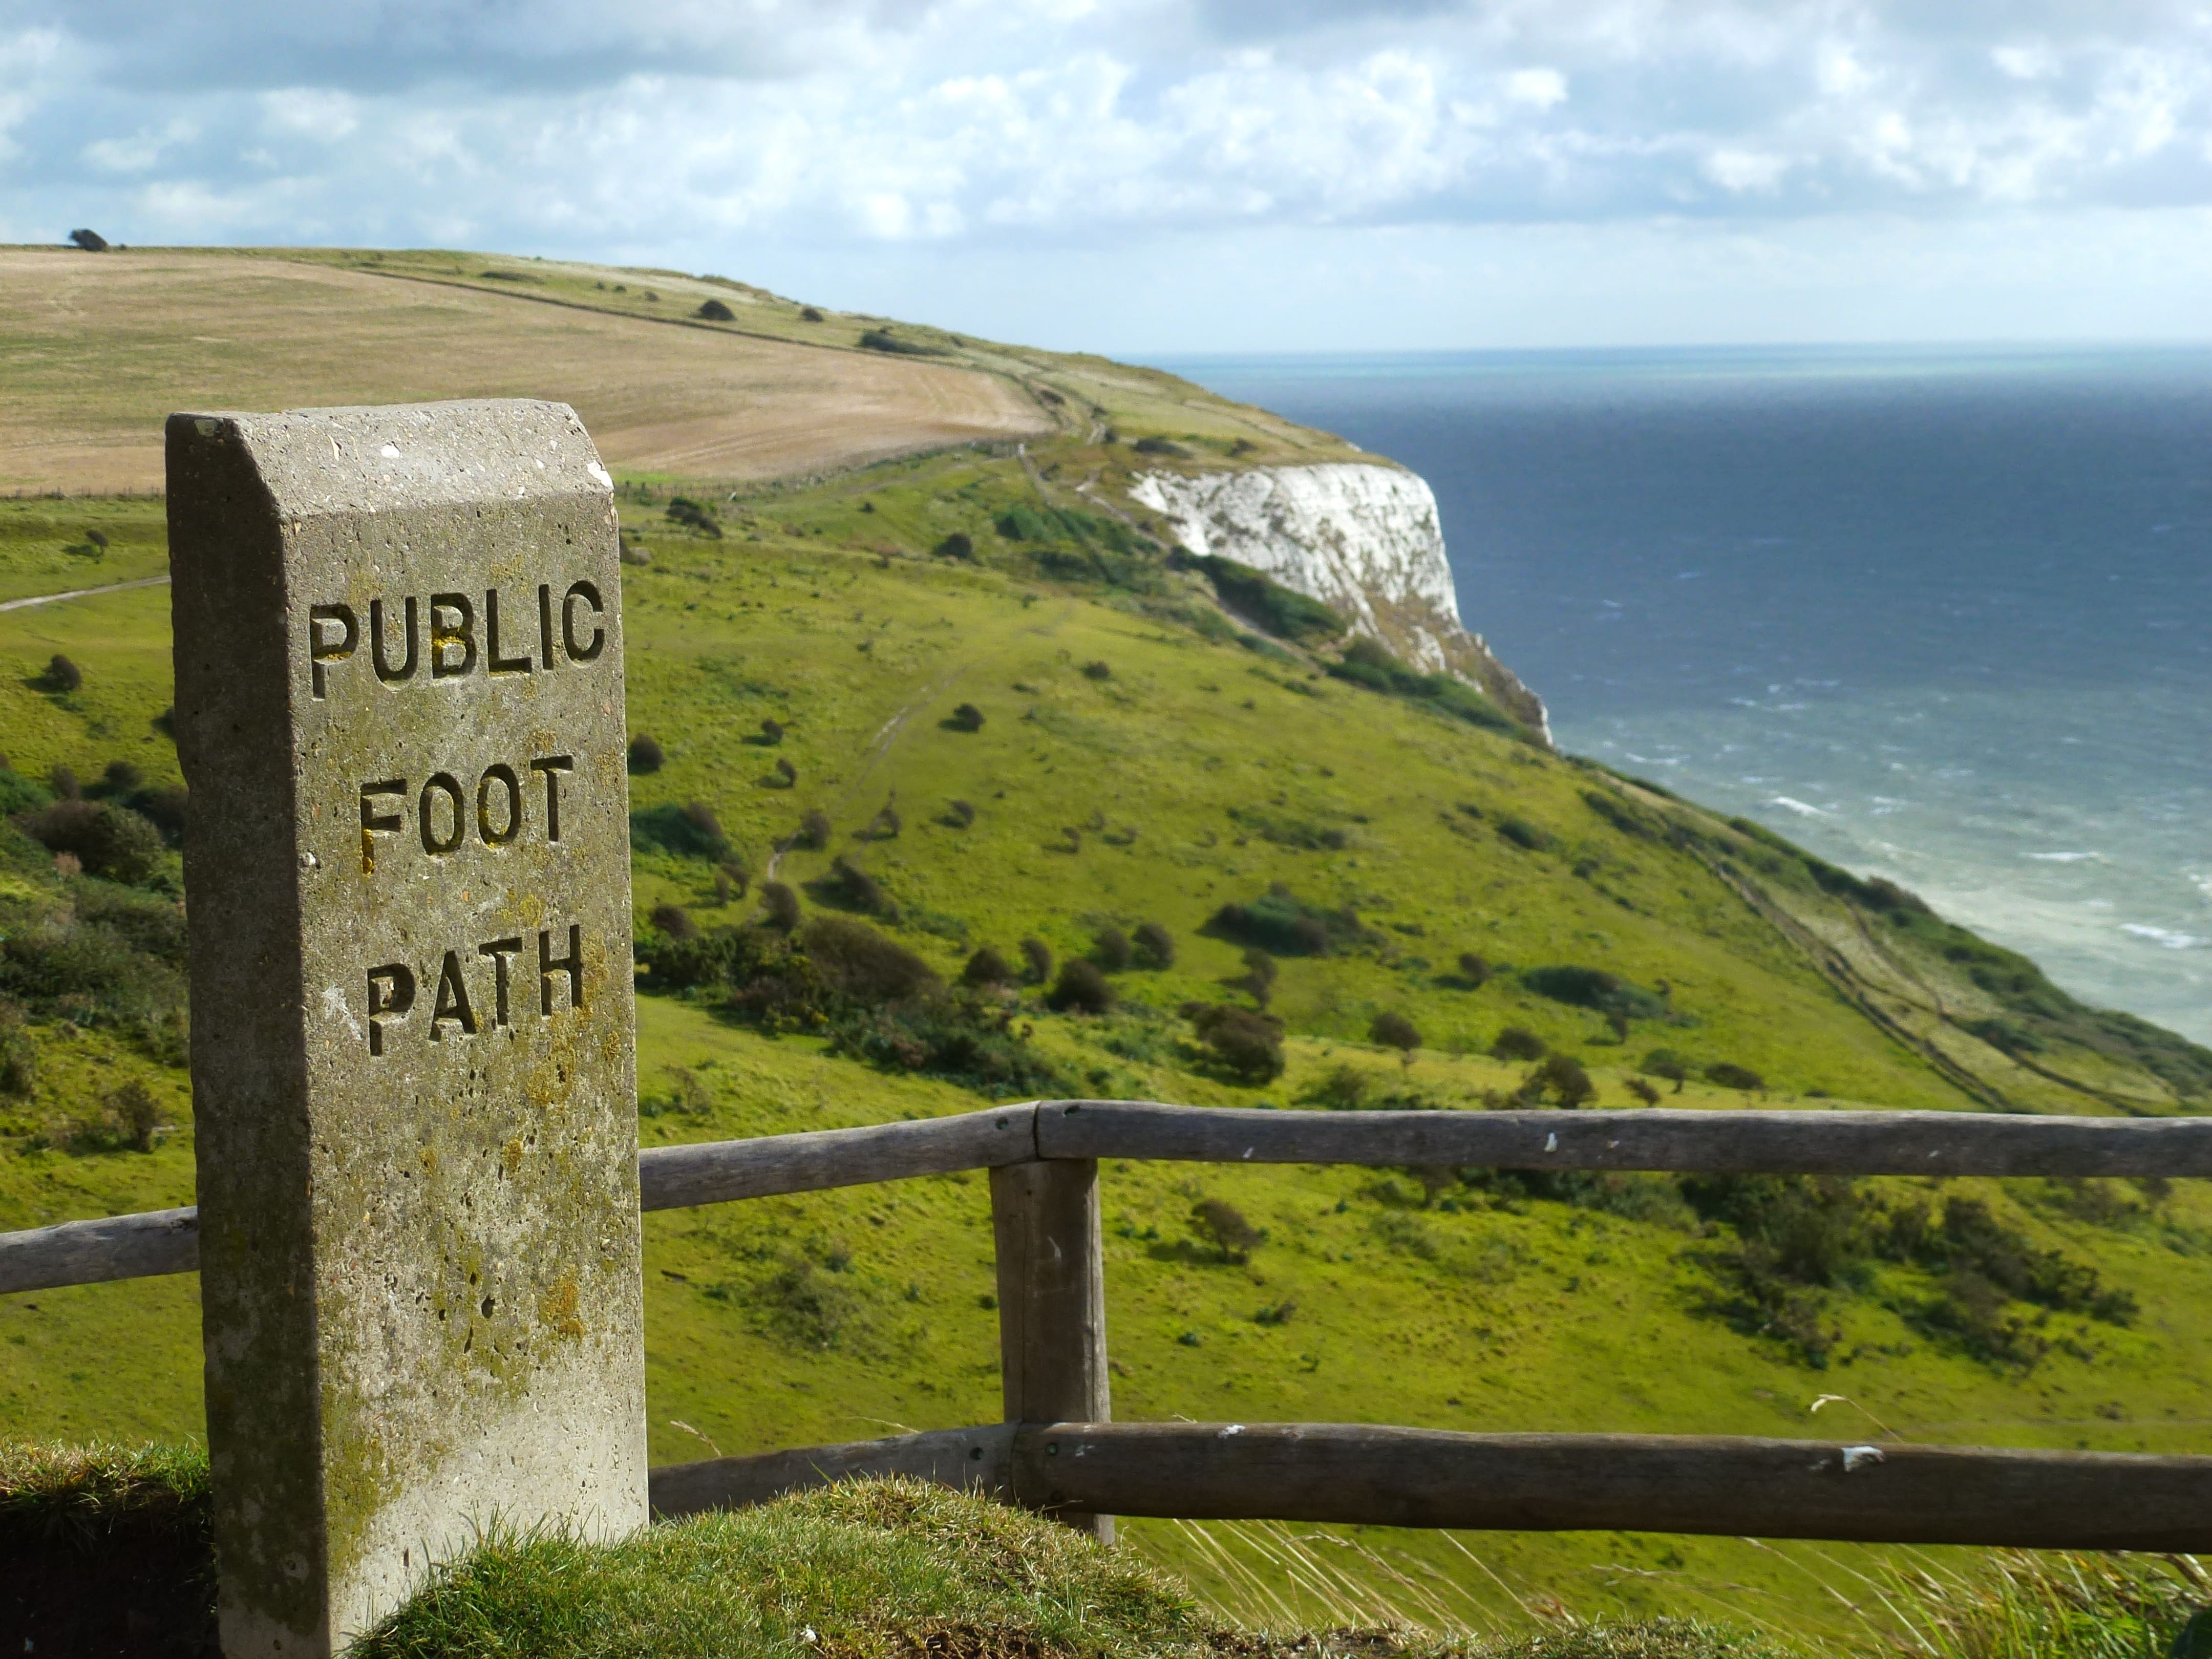 Public foot path sign, overlooking White Cliffs of Dover, with green and sea in the distance.